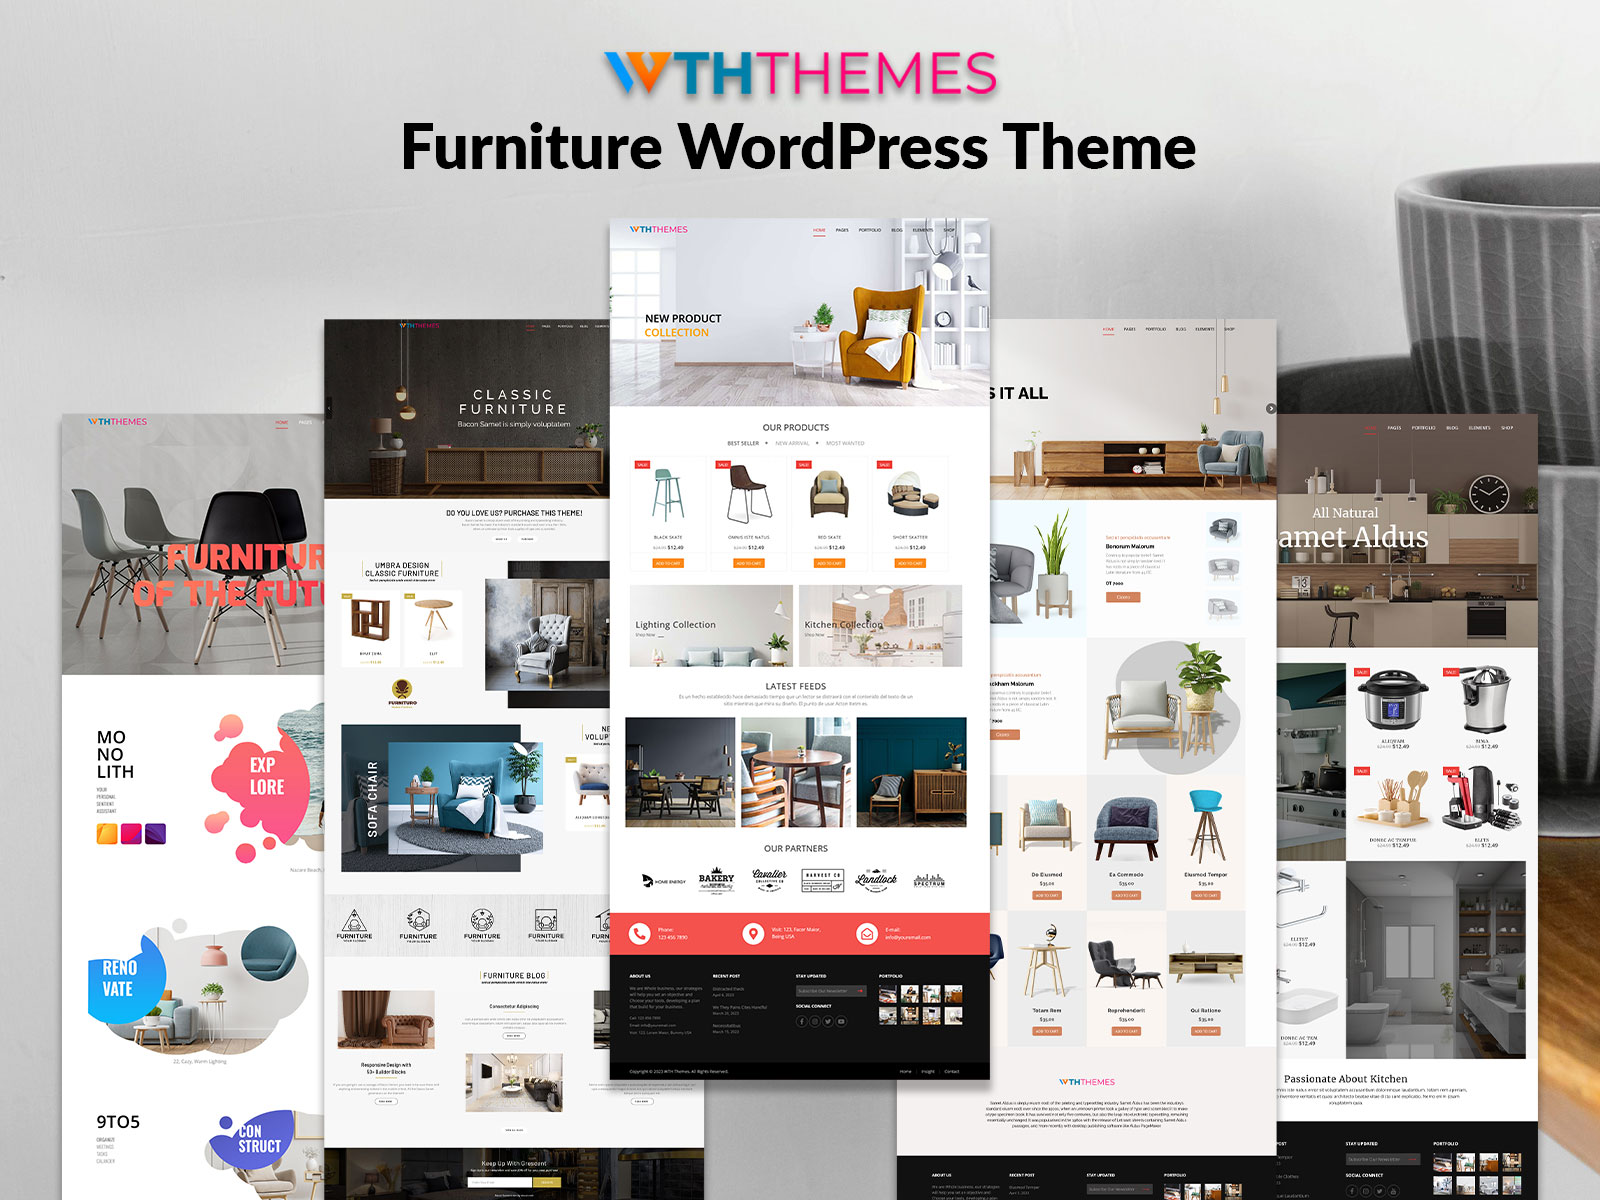 Find Our Collection Of Furniture WordPress Theme For Your Website